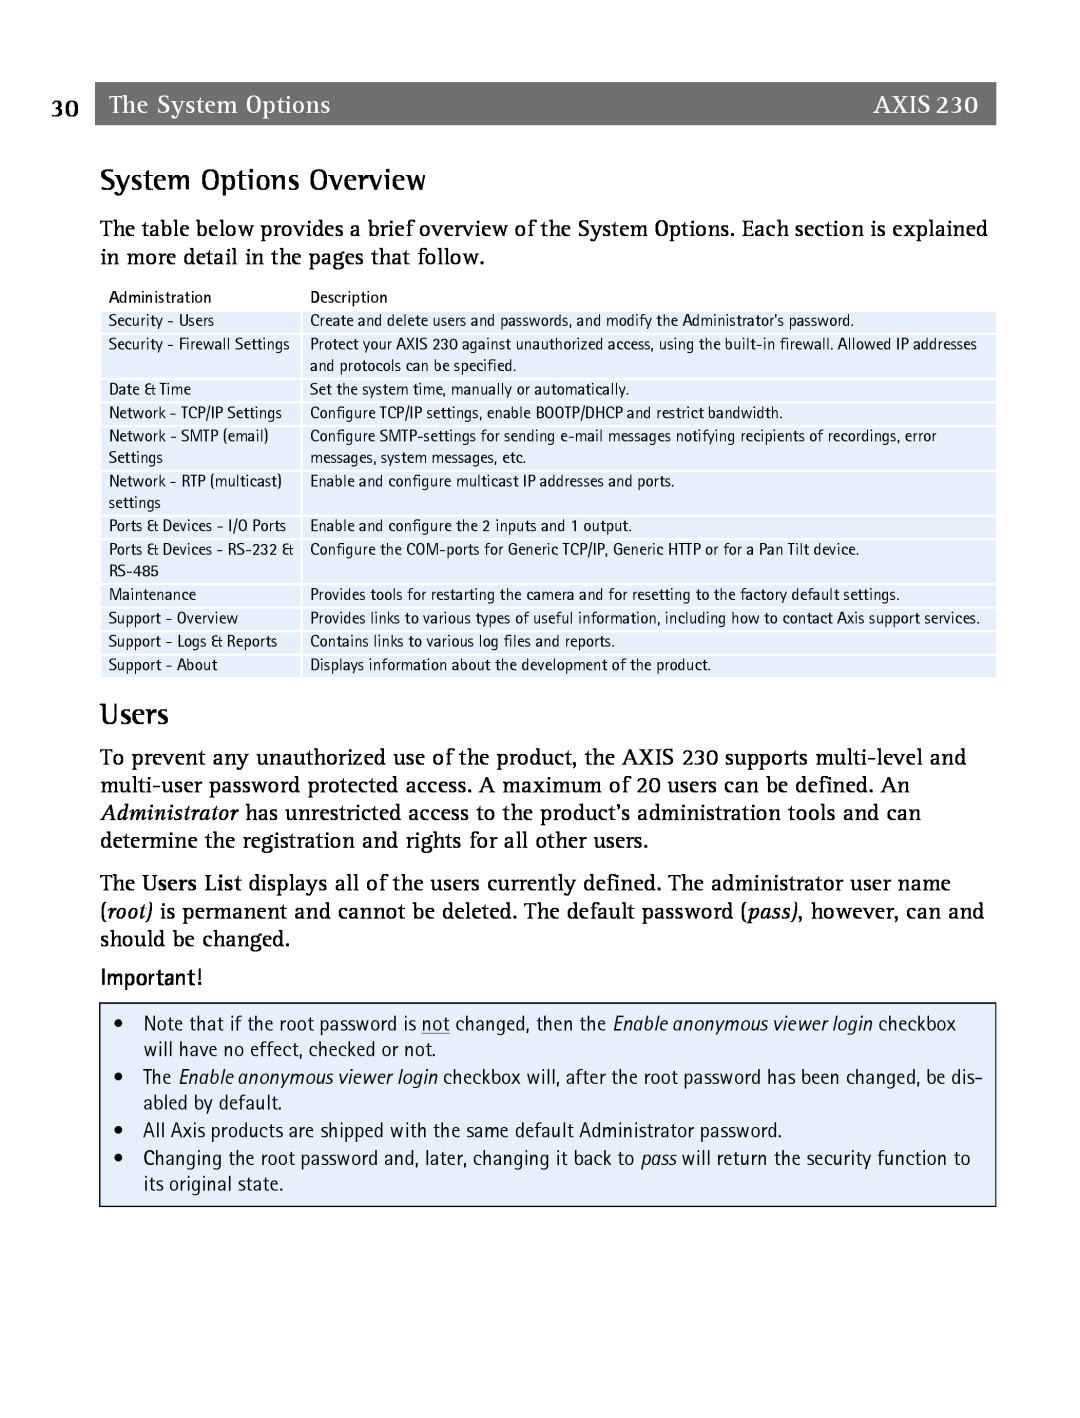 Axis Communications 2 user manual System Options Overview, Users, The System Options, Axis 